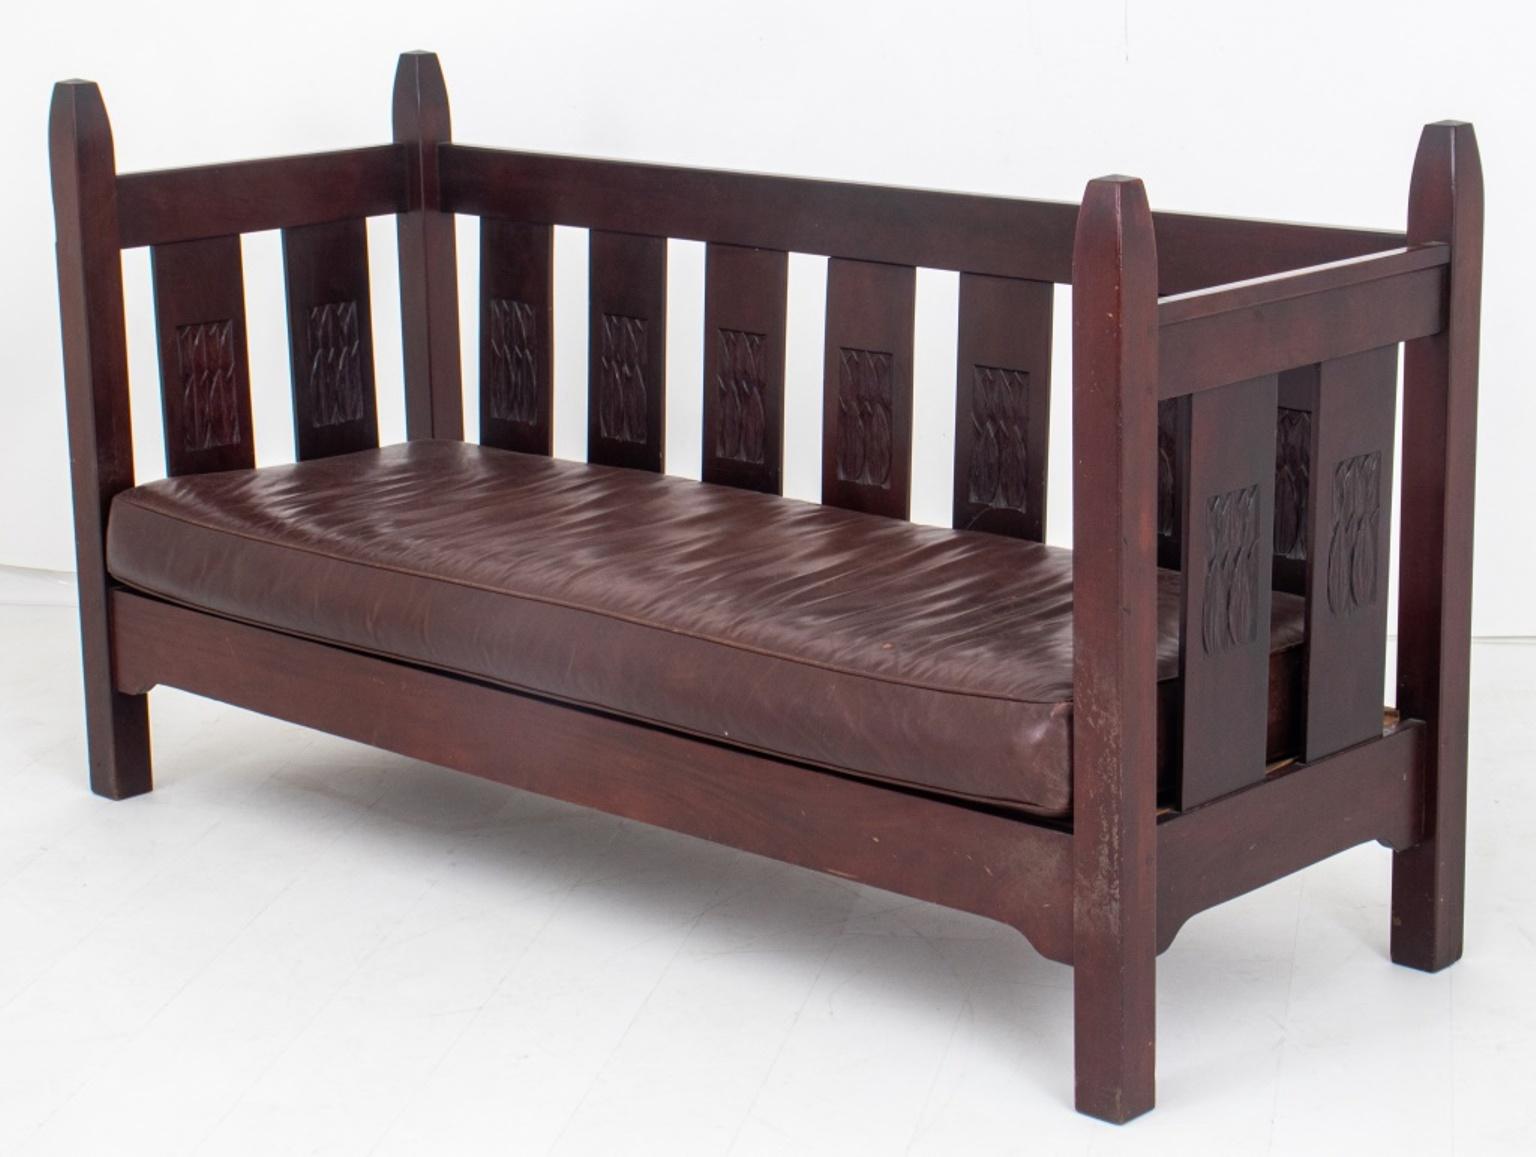 L. J.G. Stickley Arts & Crafts settee, ca. 1905-1907, rectangular, the four corners with tapering posts and relief-carved back splats with floral carved motifs, the sprung seat with leather cushion. Provenance: David Rago Arts & Crafts,